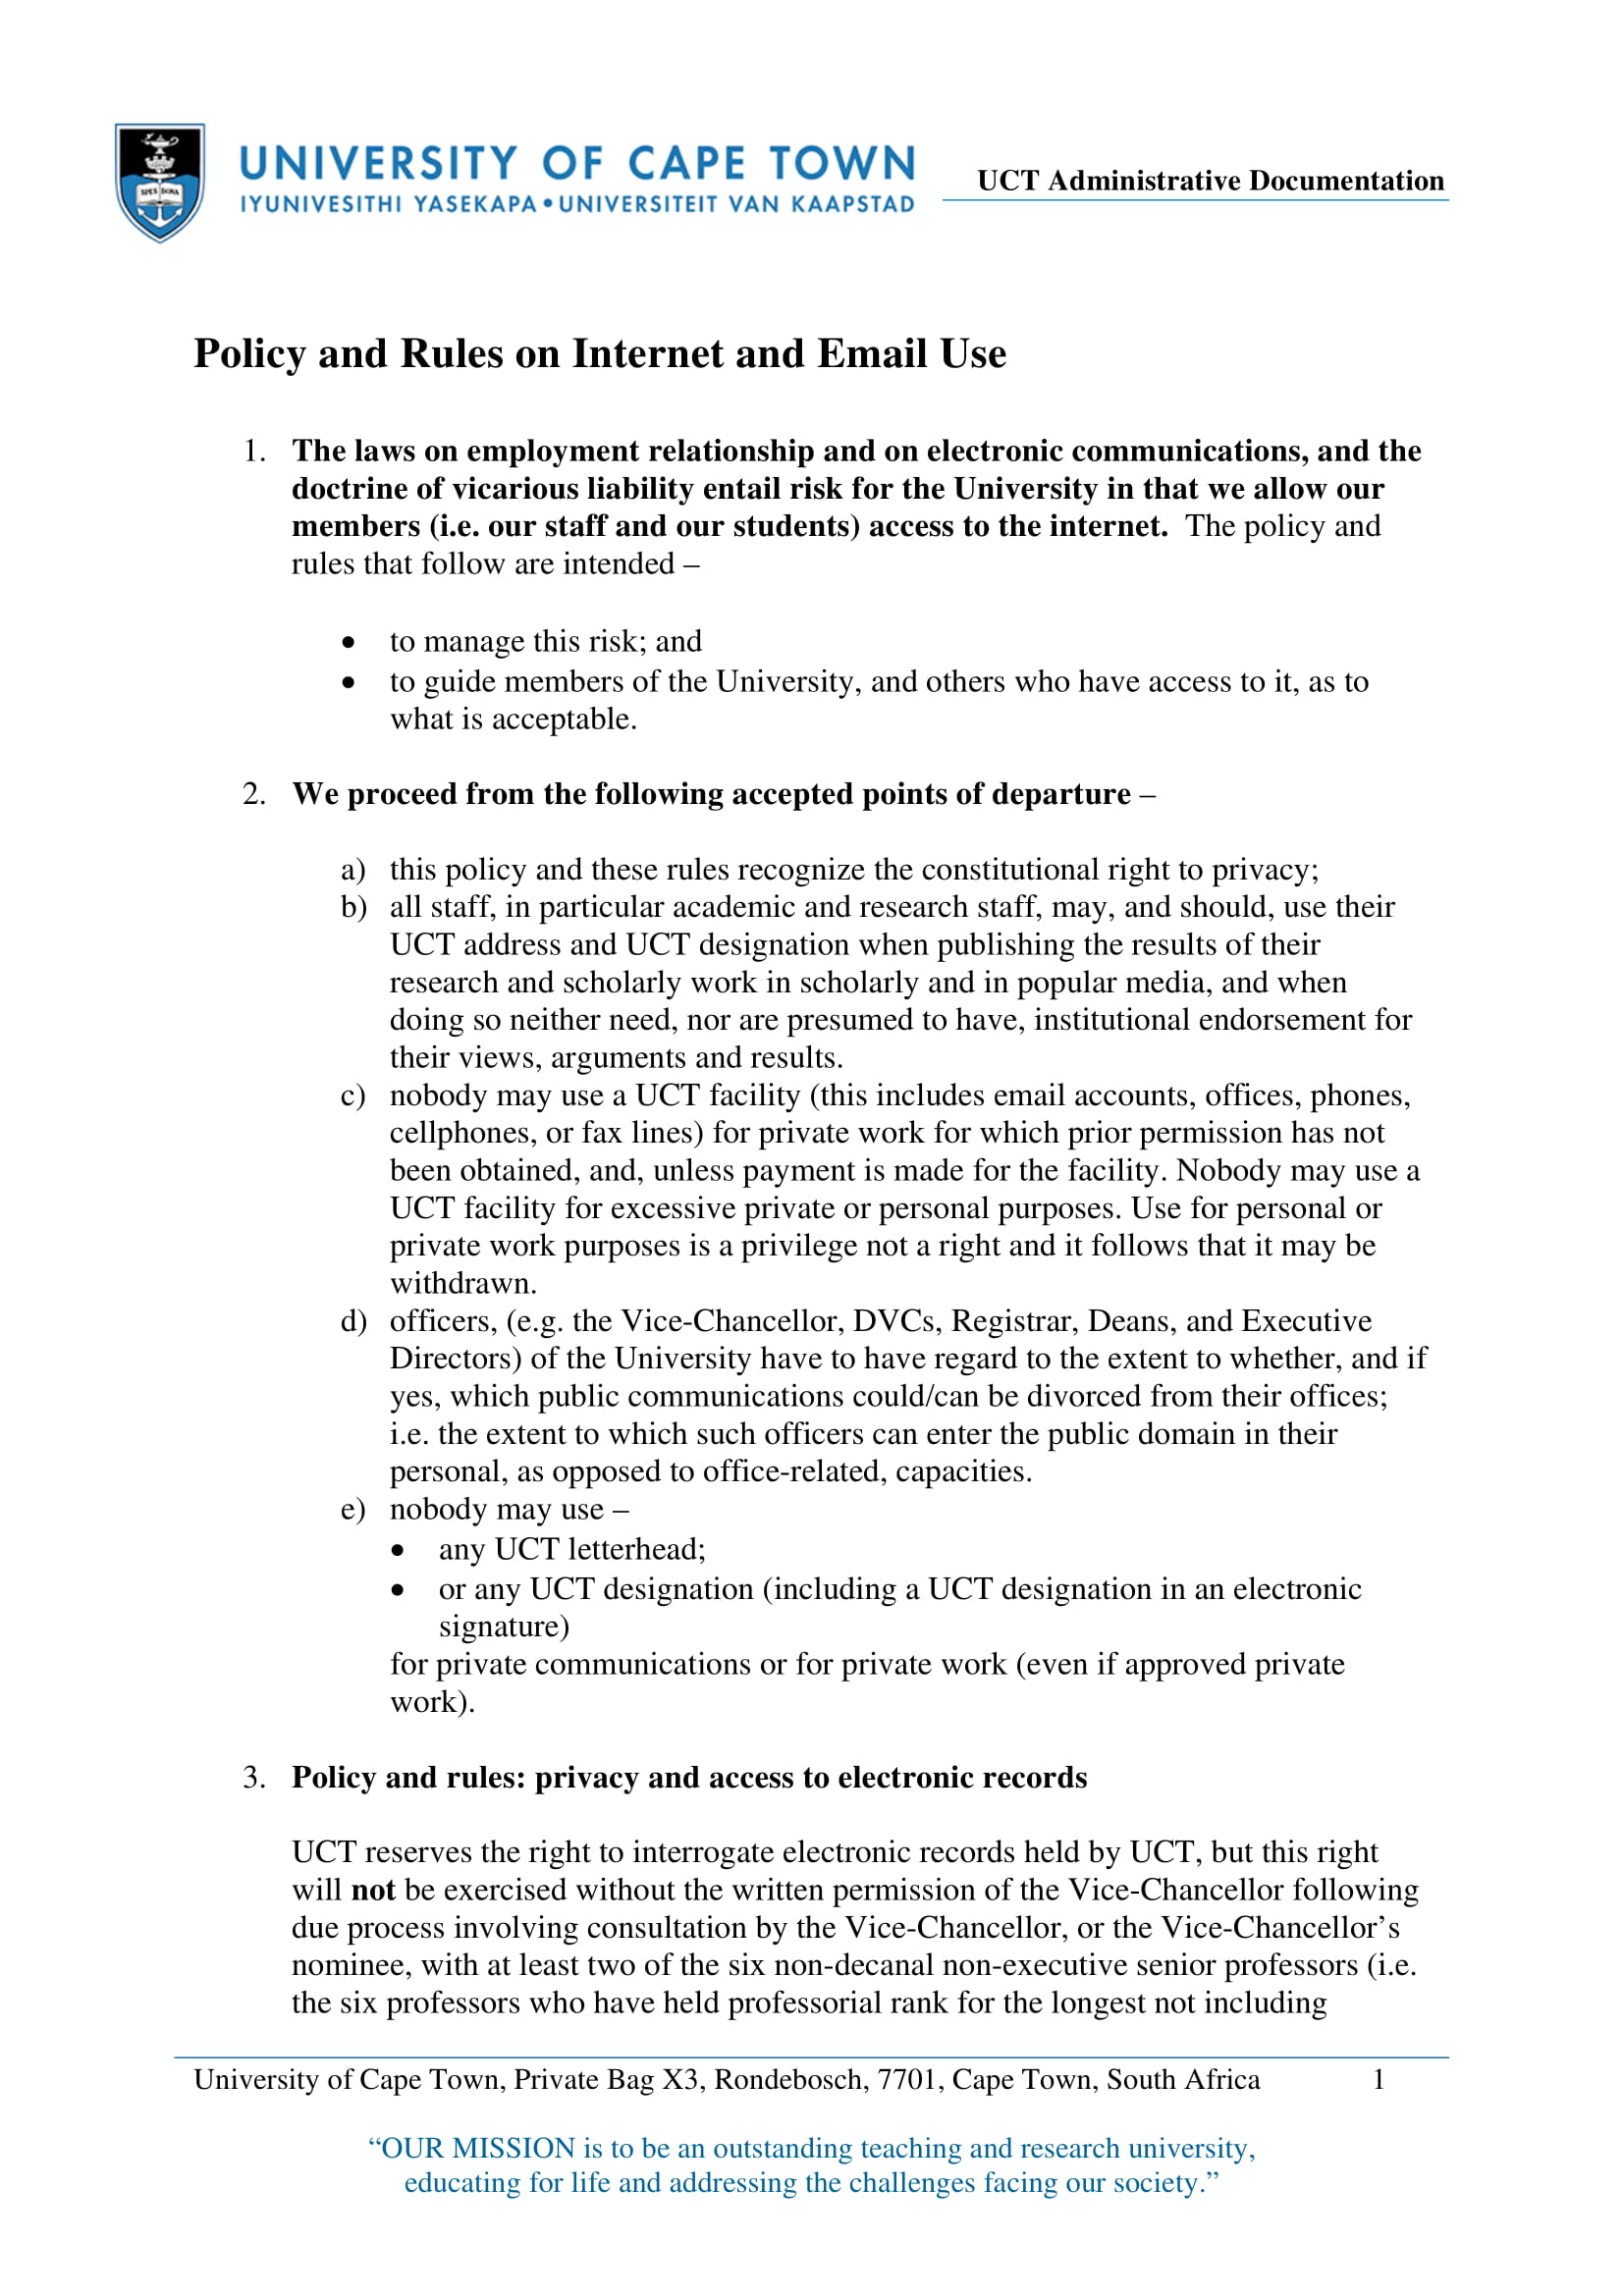 policy and rules on internet and email use for employees example